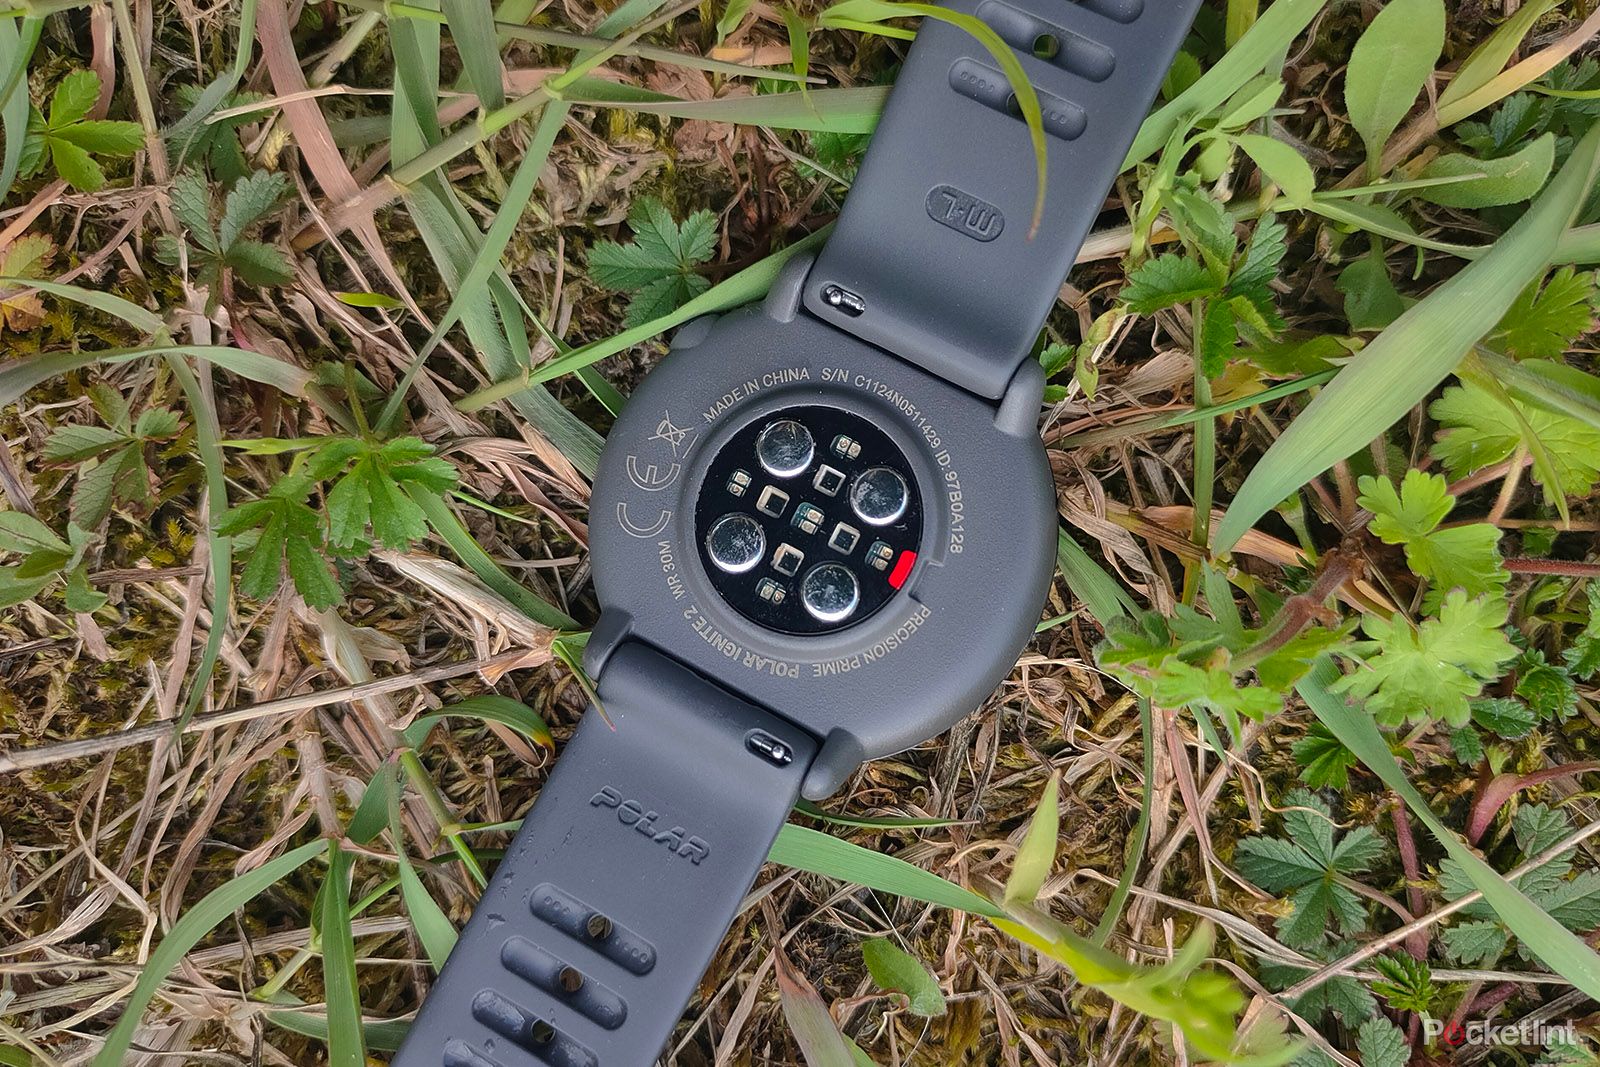 Polar Ignite 2 review: A top fitness watch with tons of